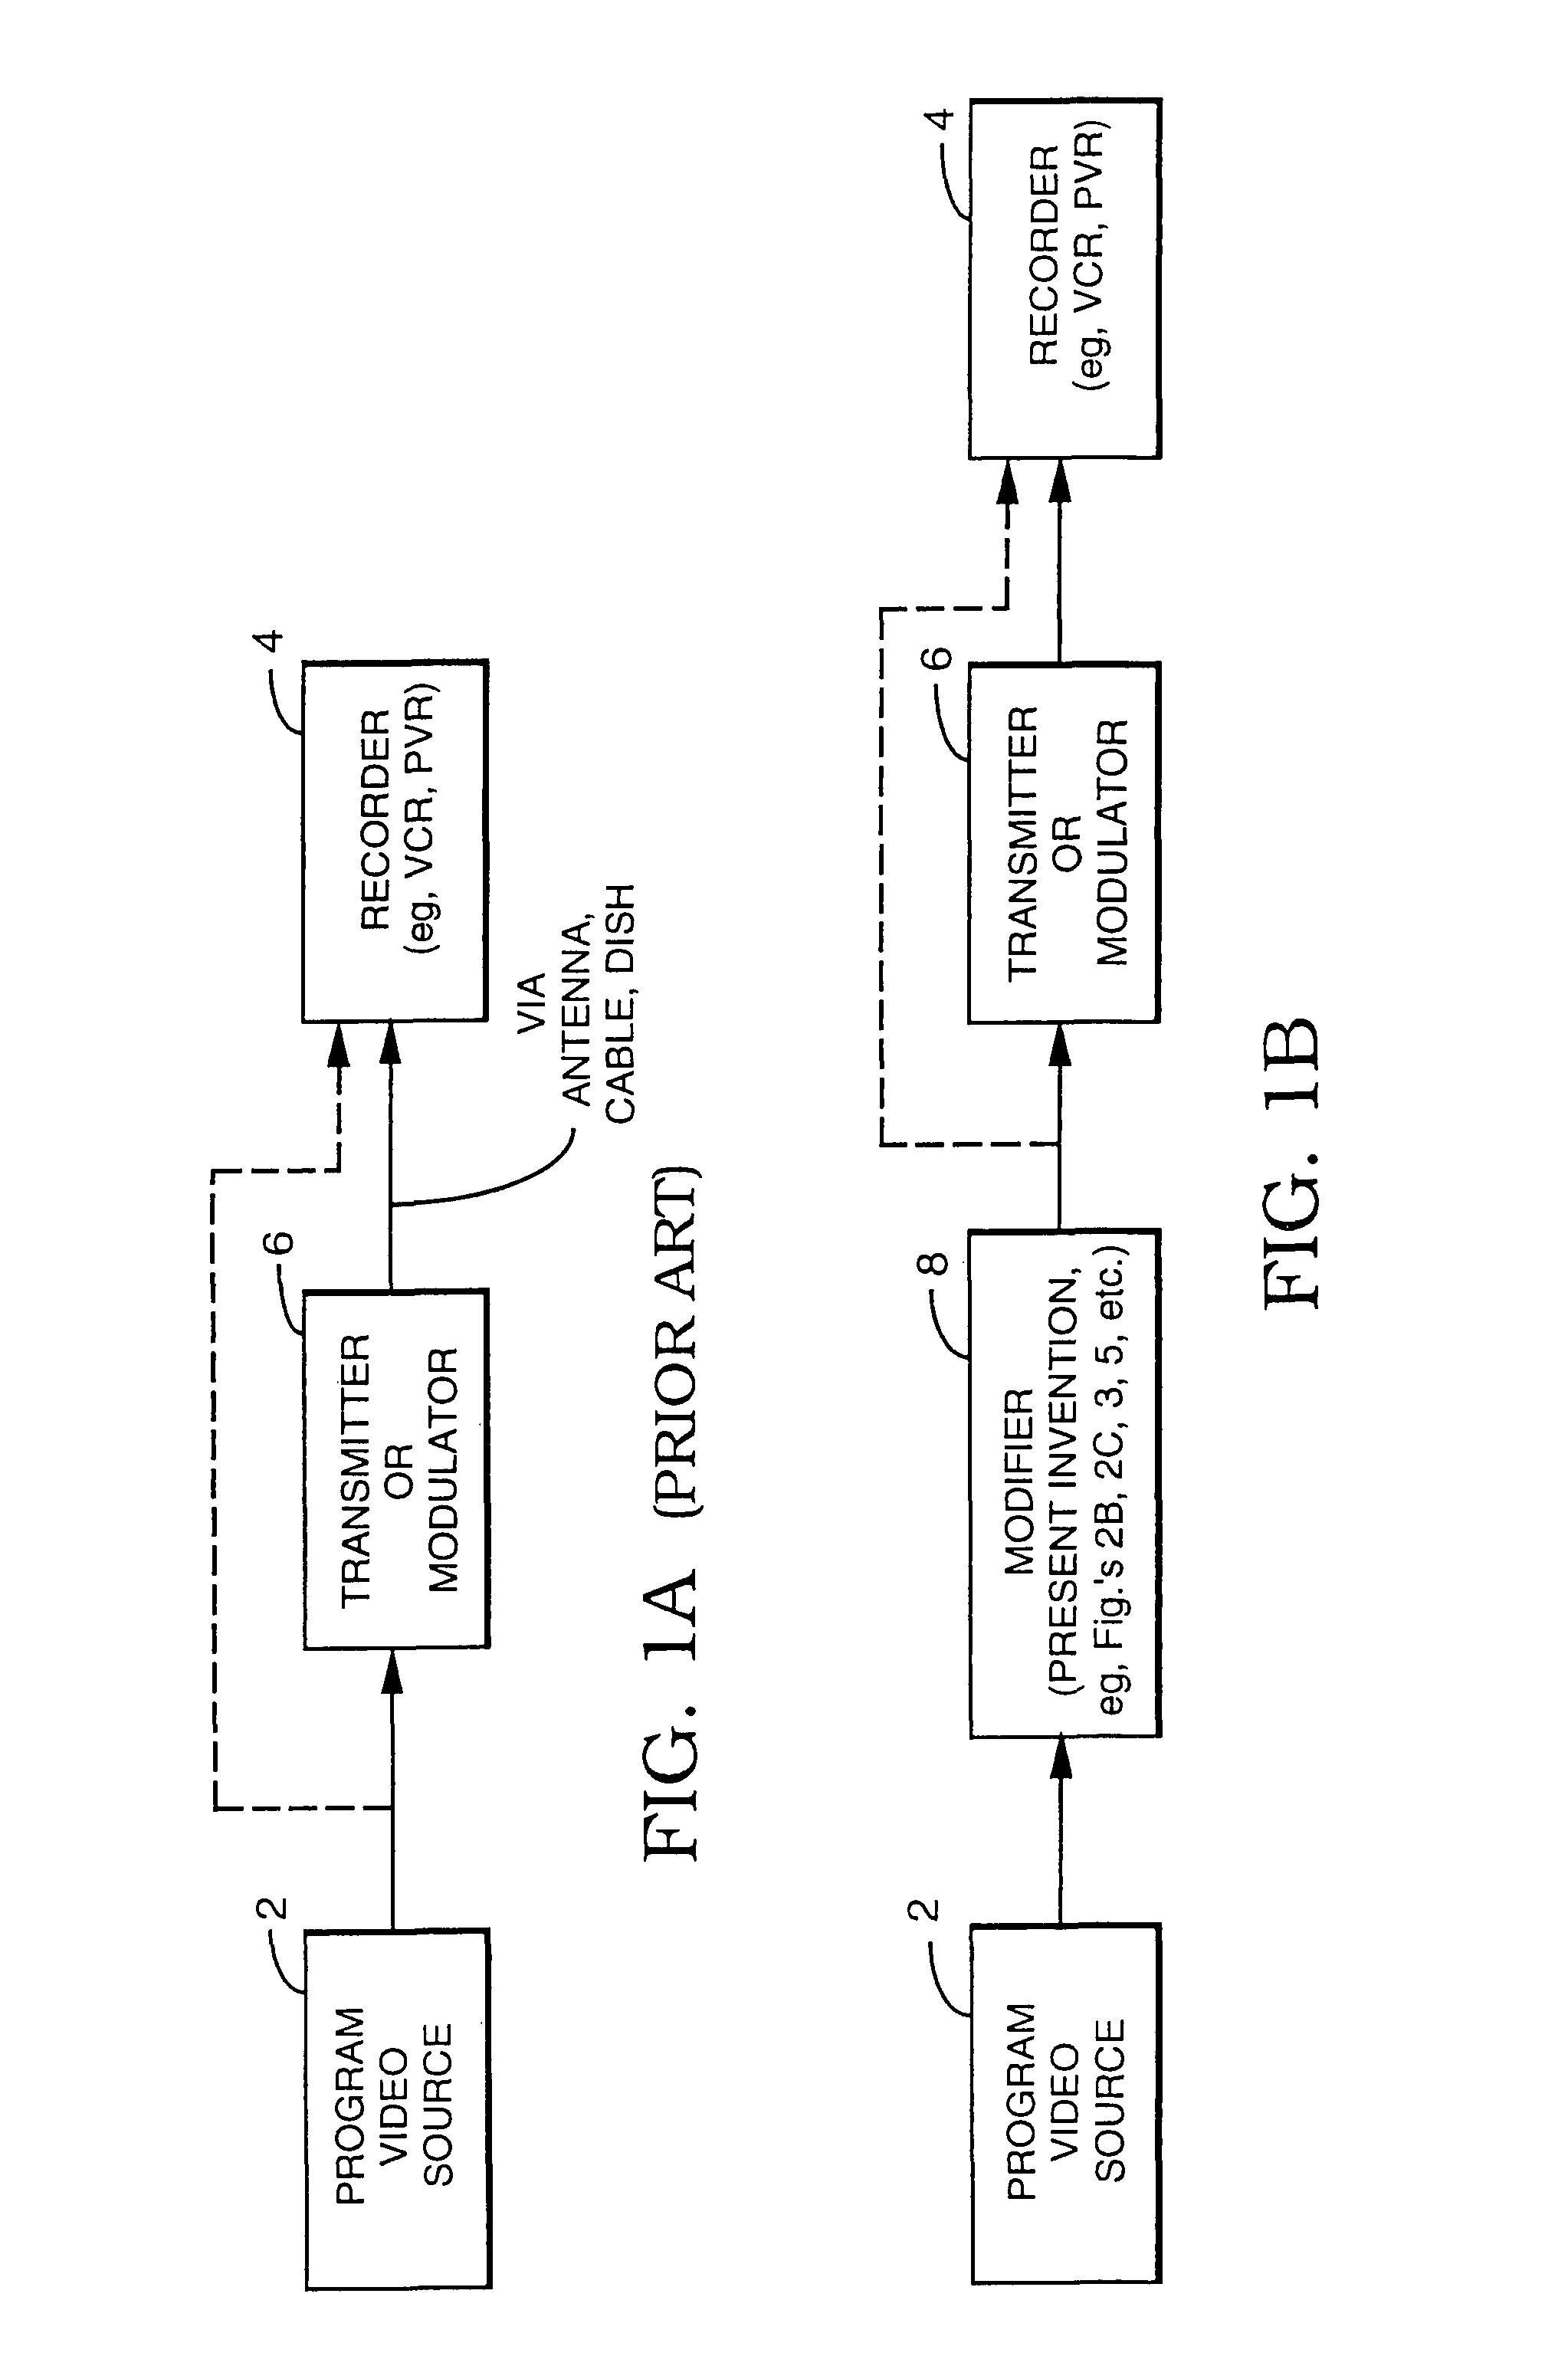 Method and apparatus for reducing and restoring the effectiveness of a commercial skip system